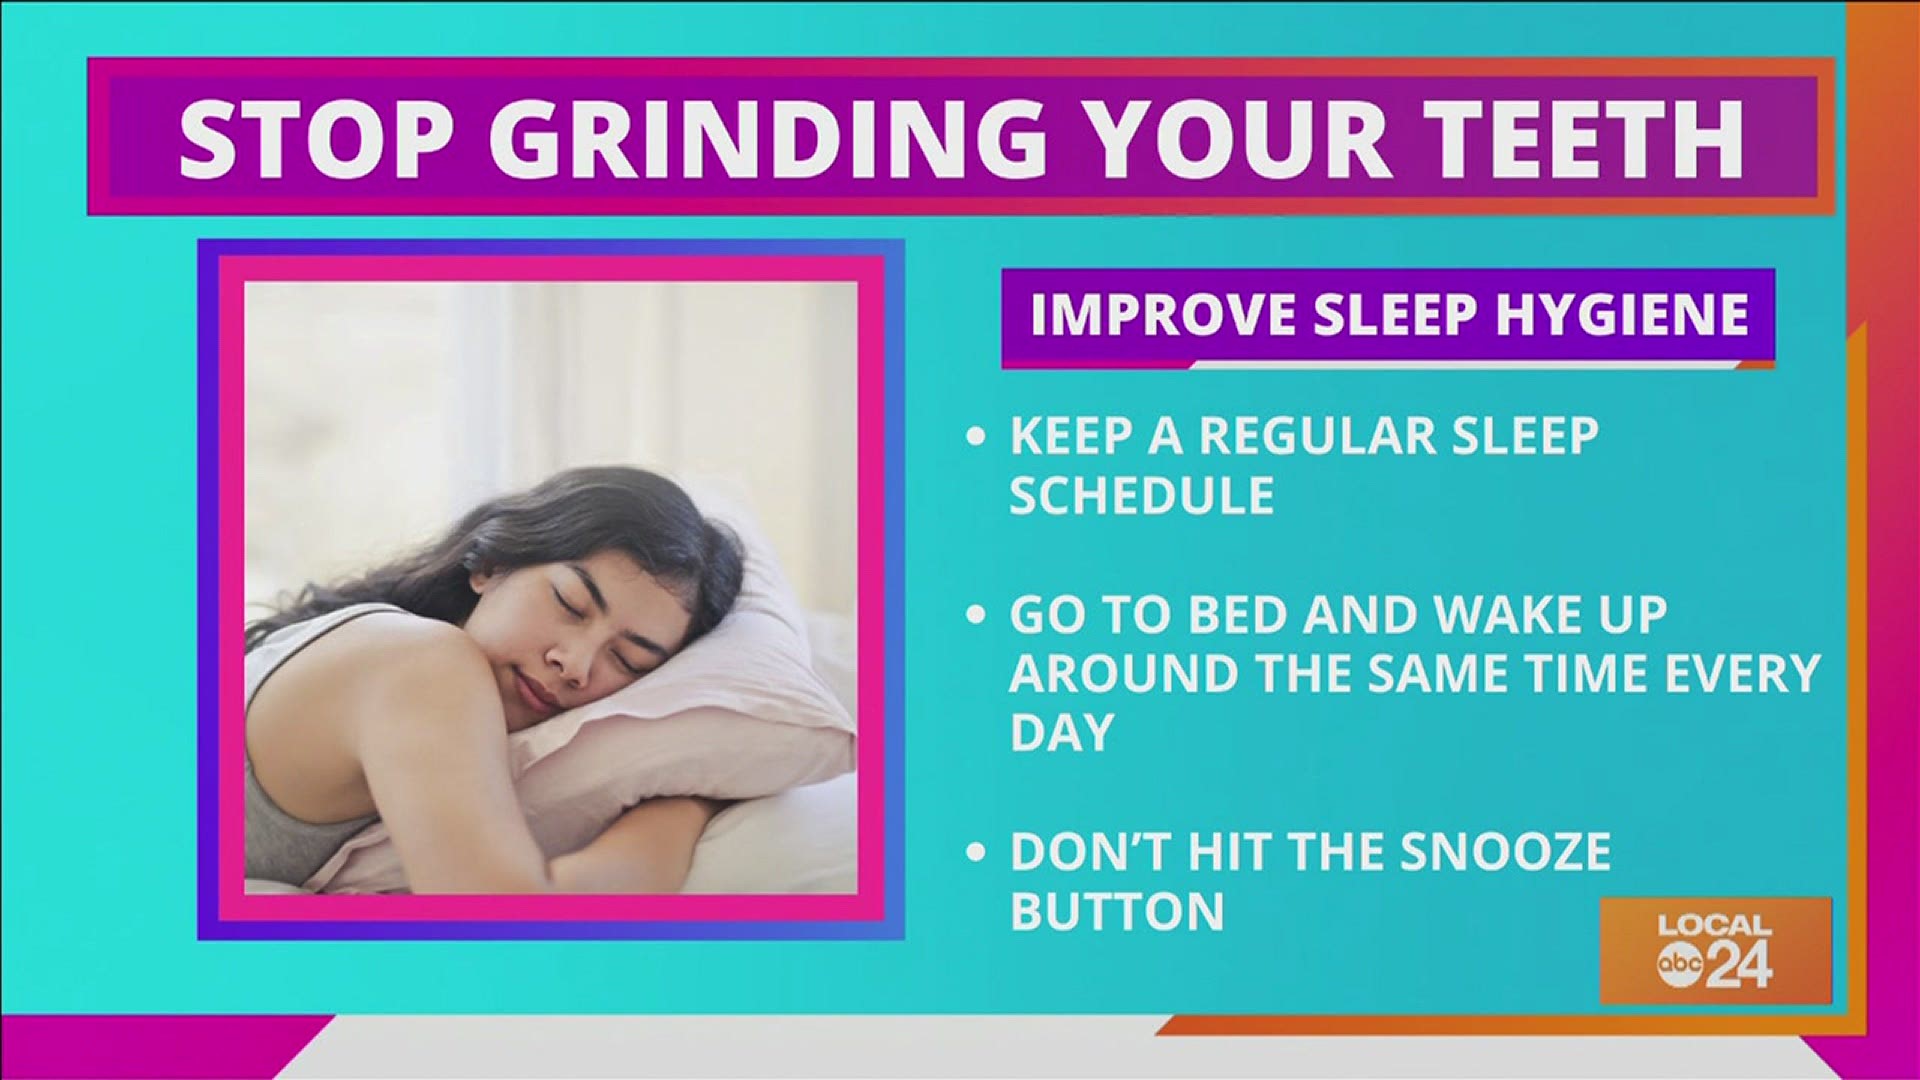 Join Sydney Neely on "The Shortcut" for tips and tricks on how to stop grinding your teeth at night!